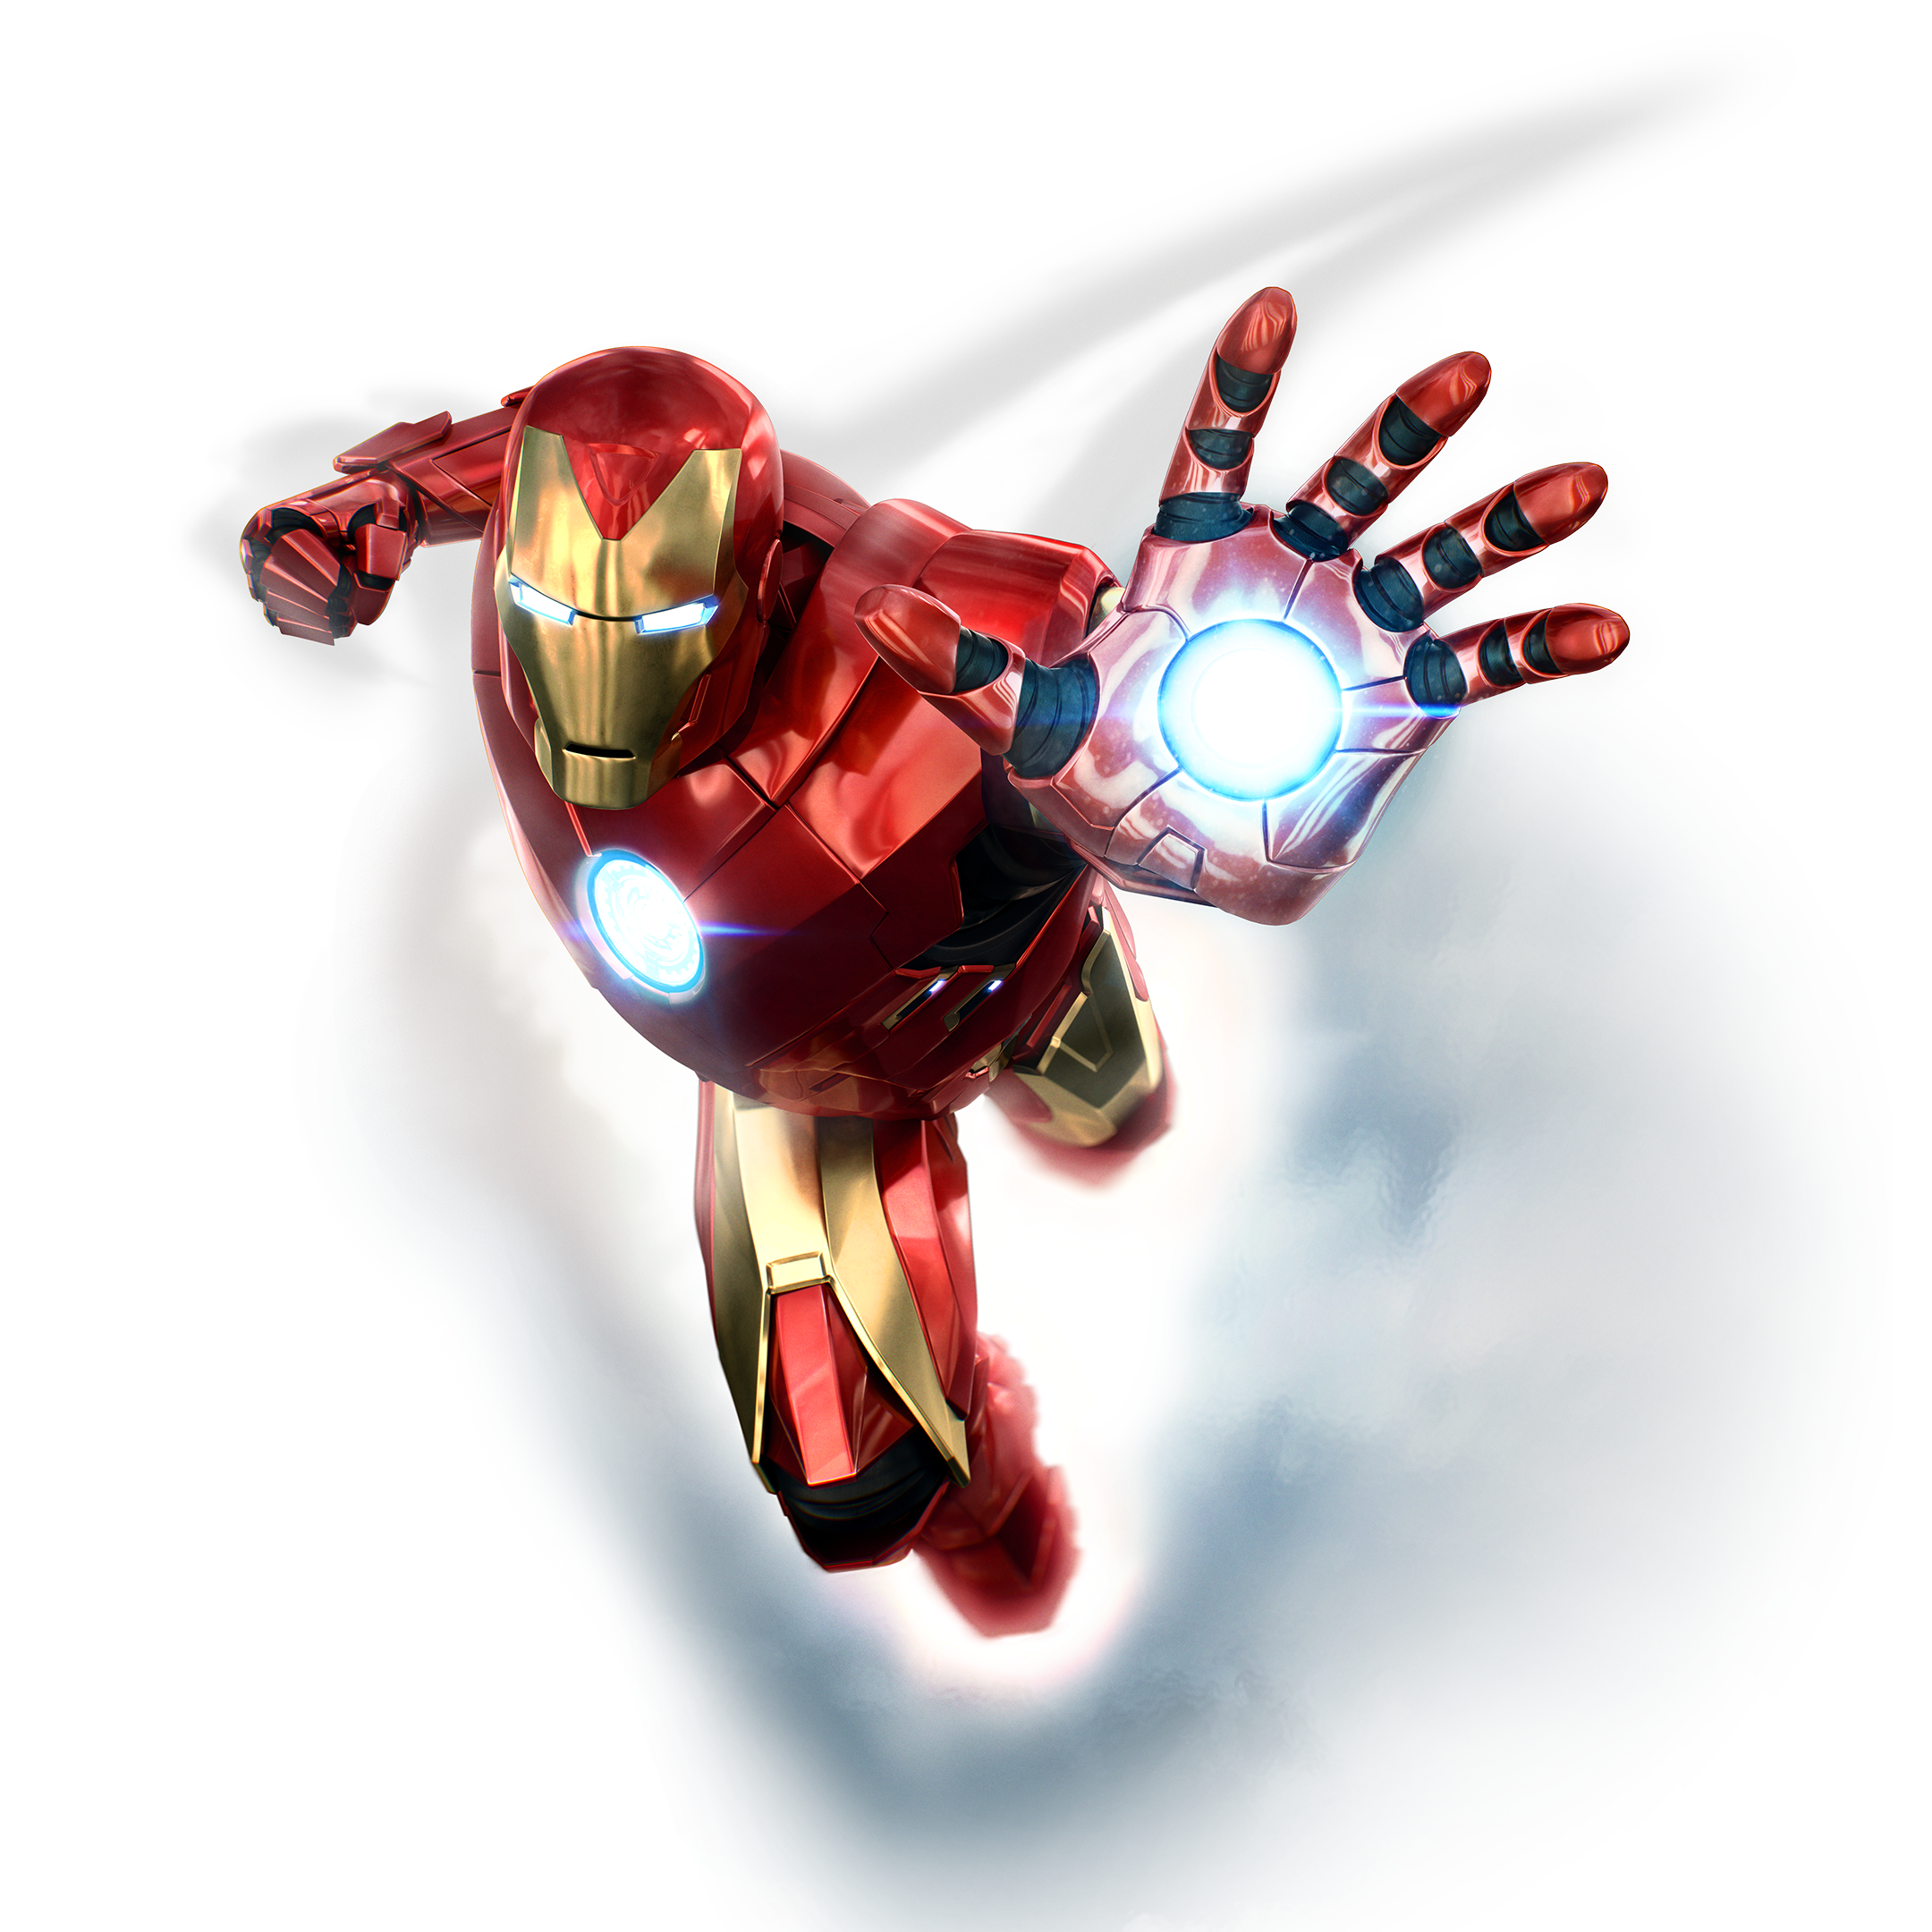 iron man vr ps4 store